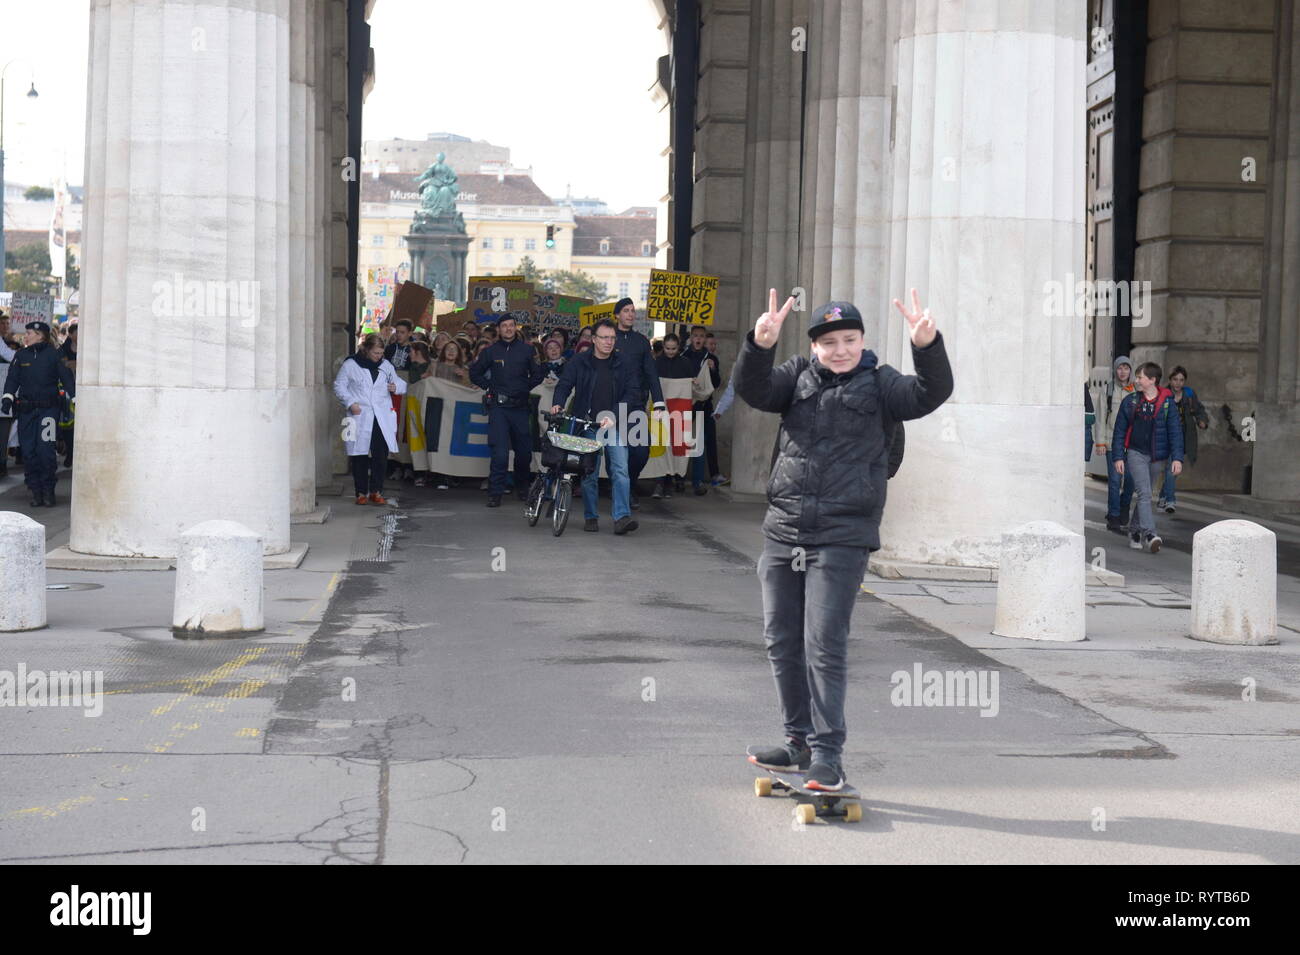 Vienna, Austria. 15 March 2019. Action Platform 'Fridays for Future' 'Global Climate Change' for a sustainable future, healthy environment, courageous climate policy, global climate justice and food security. Credit: Franz Perc / Alamy Live News Stock Photo